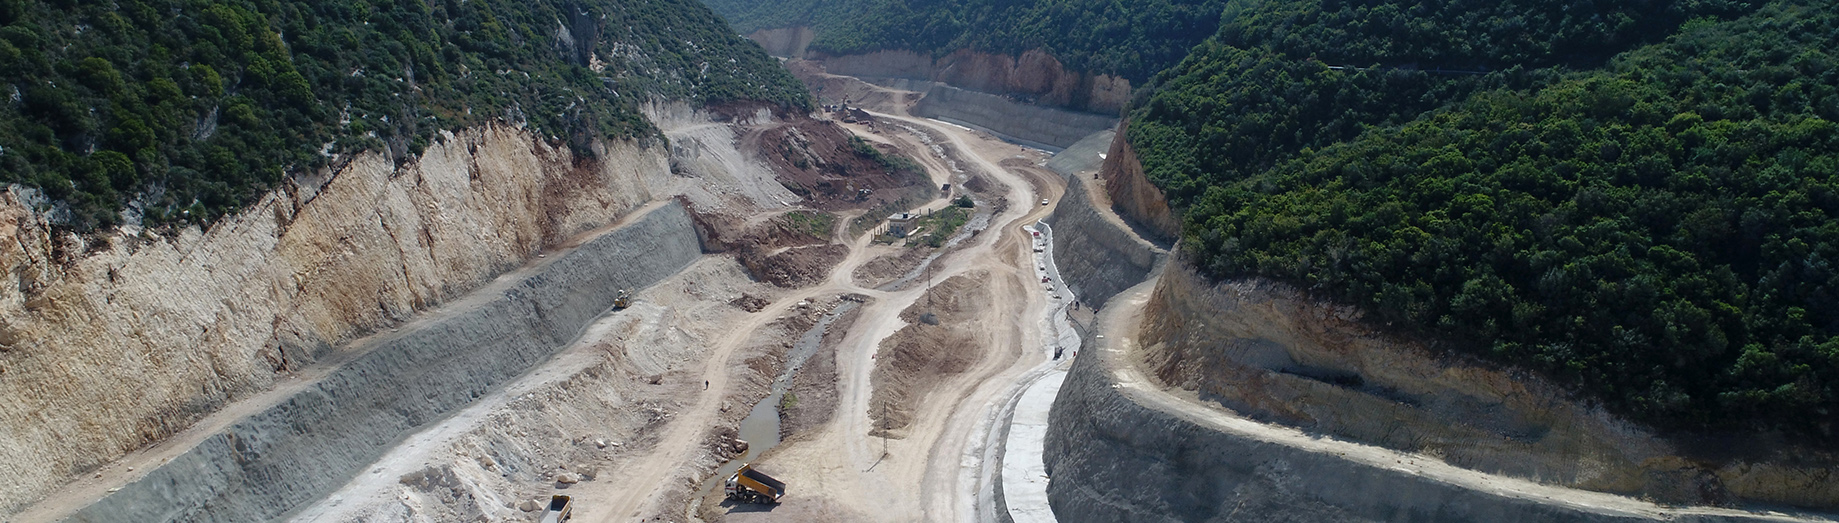 Construction of the Mseilha Dam and Lake